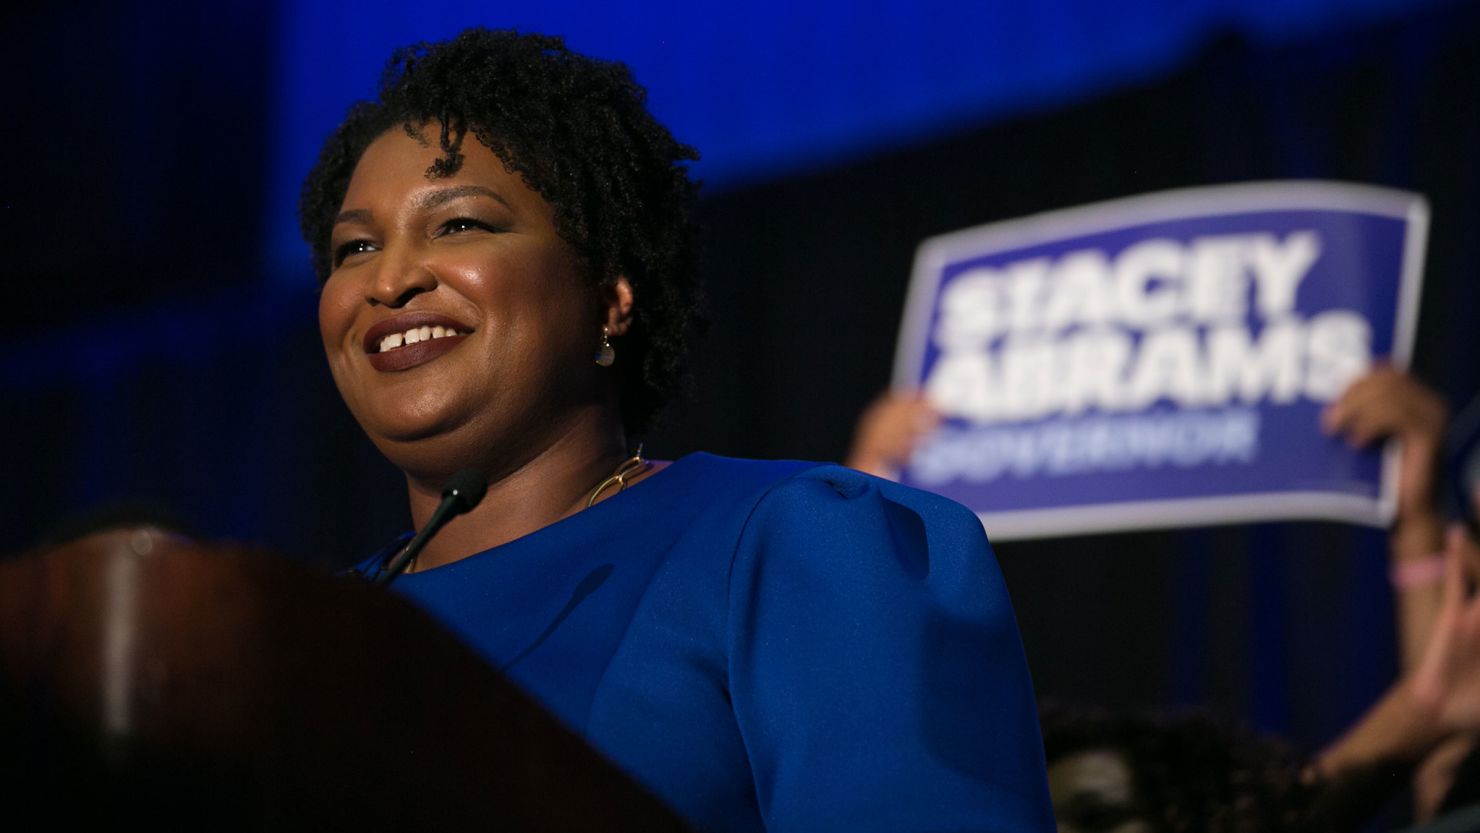 Georgia Democratic Gubernatorial candidate Stacey Abrams takes the stage to declare victory in the primary during an election night event on May 22, 2018 in Atlanta, Georgia.  If elected, Abrams would become the first African American female governor in the nation.  (Photo by Jessica McGowan/Getty Images)